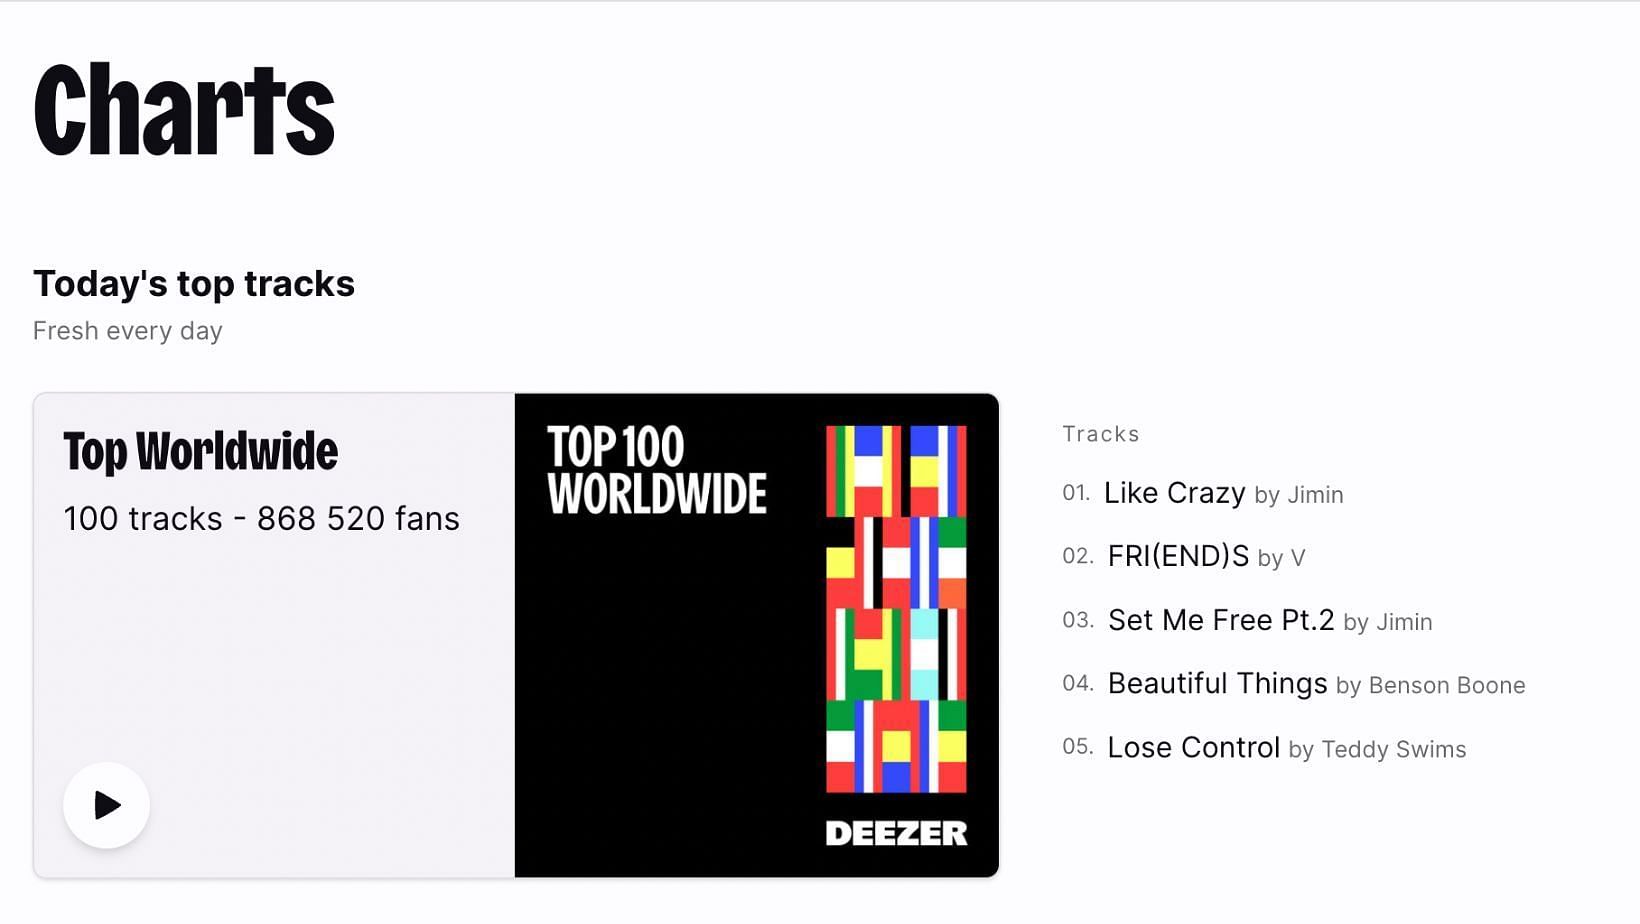 BTS&#039; Jimin&#039;s &#039;Like Crazy becomes the first and only solo song by a K-Pop act to reach #1 on the Deezer Top 100 USA chart history. (Image via DEEZER)